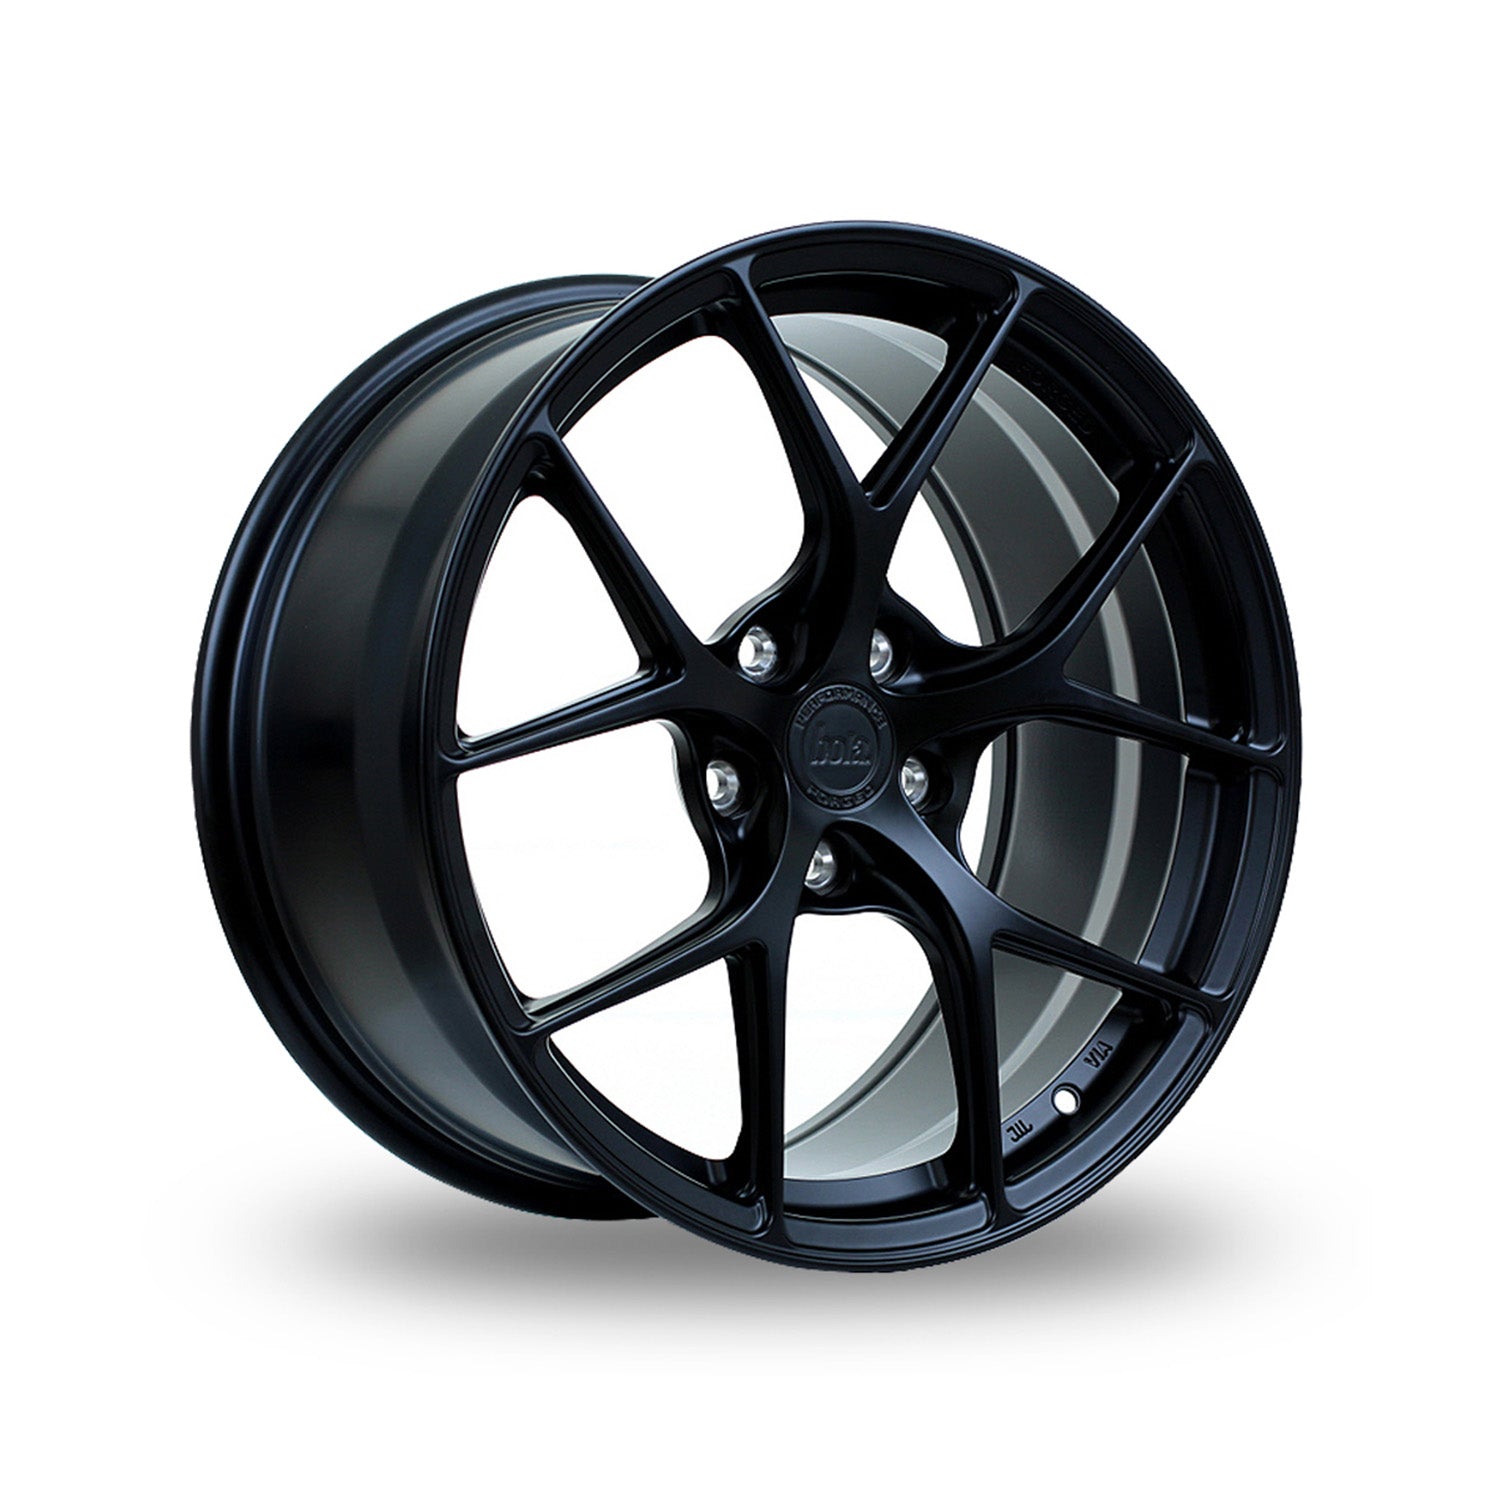 Bola FP2 19" Forged Alloy Wheels In Satin Black - OEM Sizing